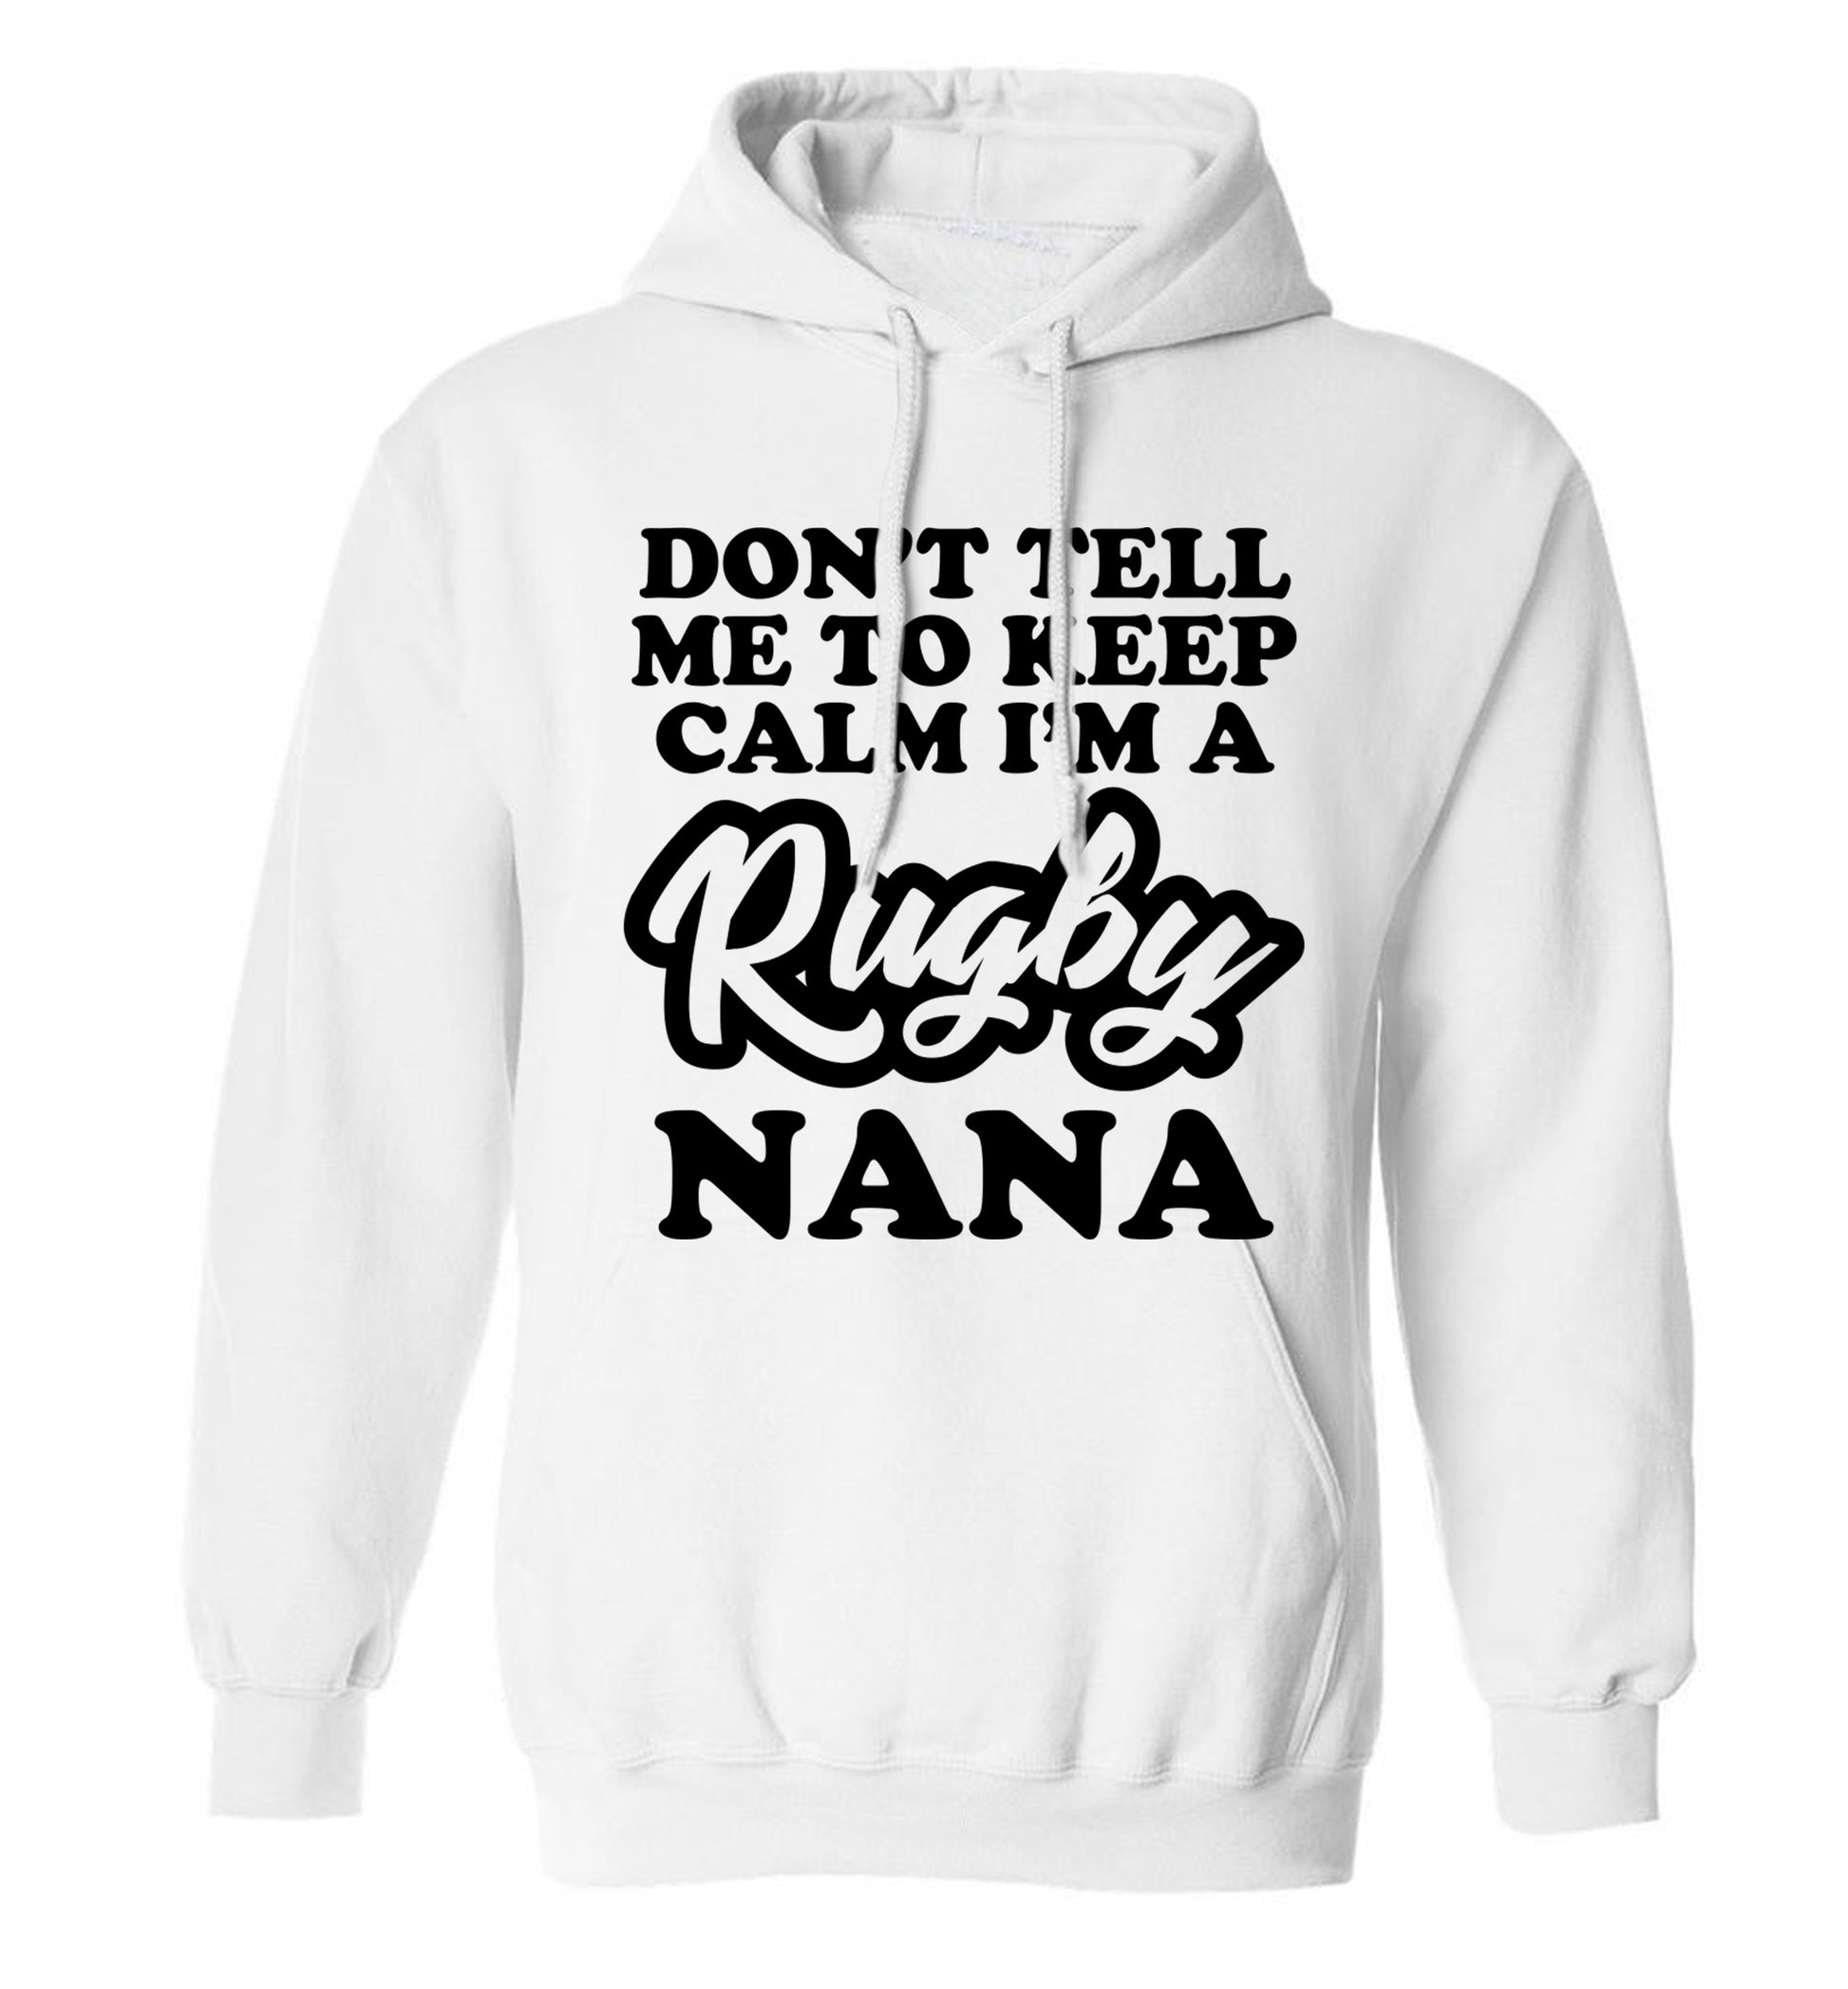 Don't tell me to keep calm I'm a rugby nana adults unisex white hoodie 2XL